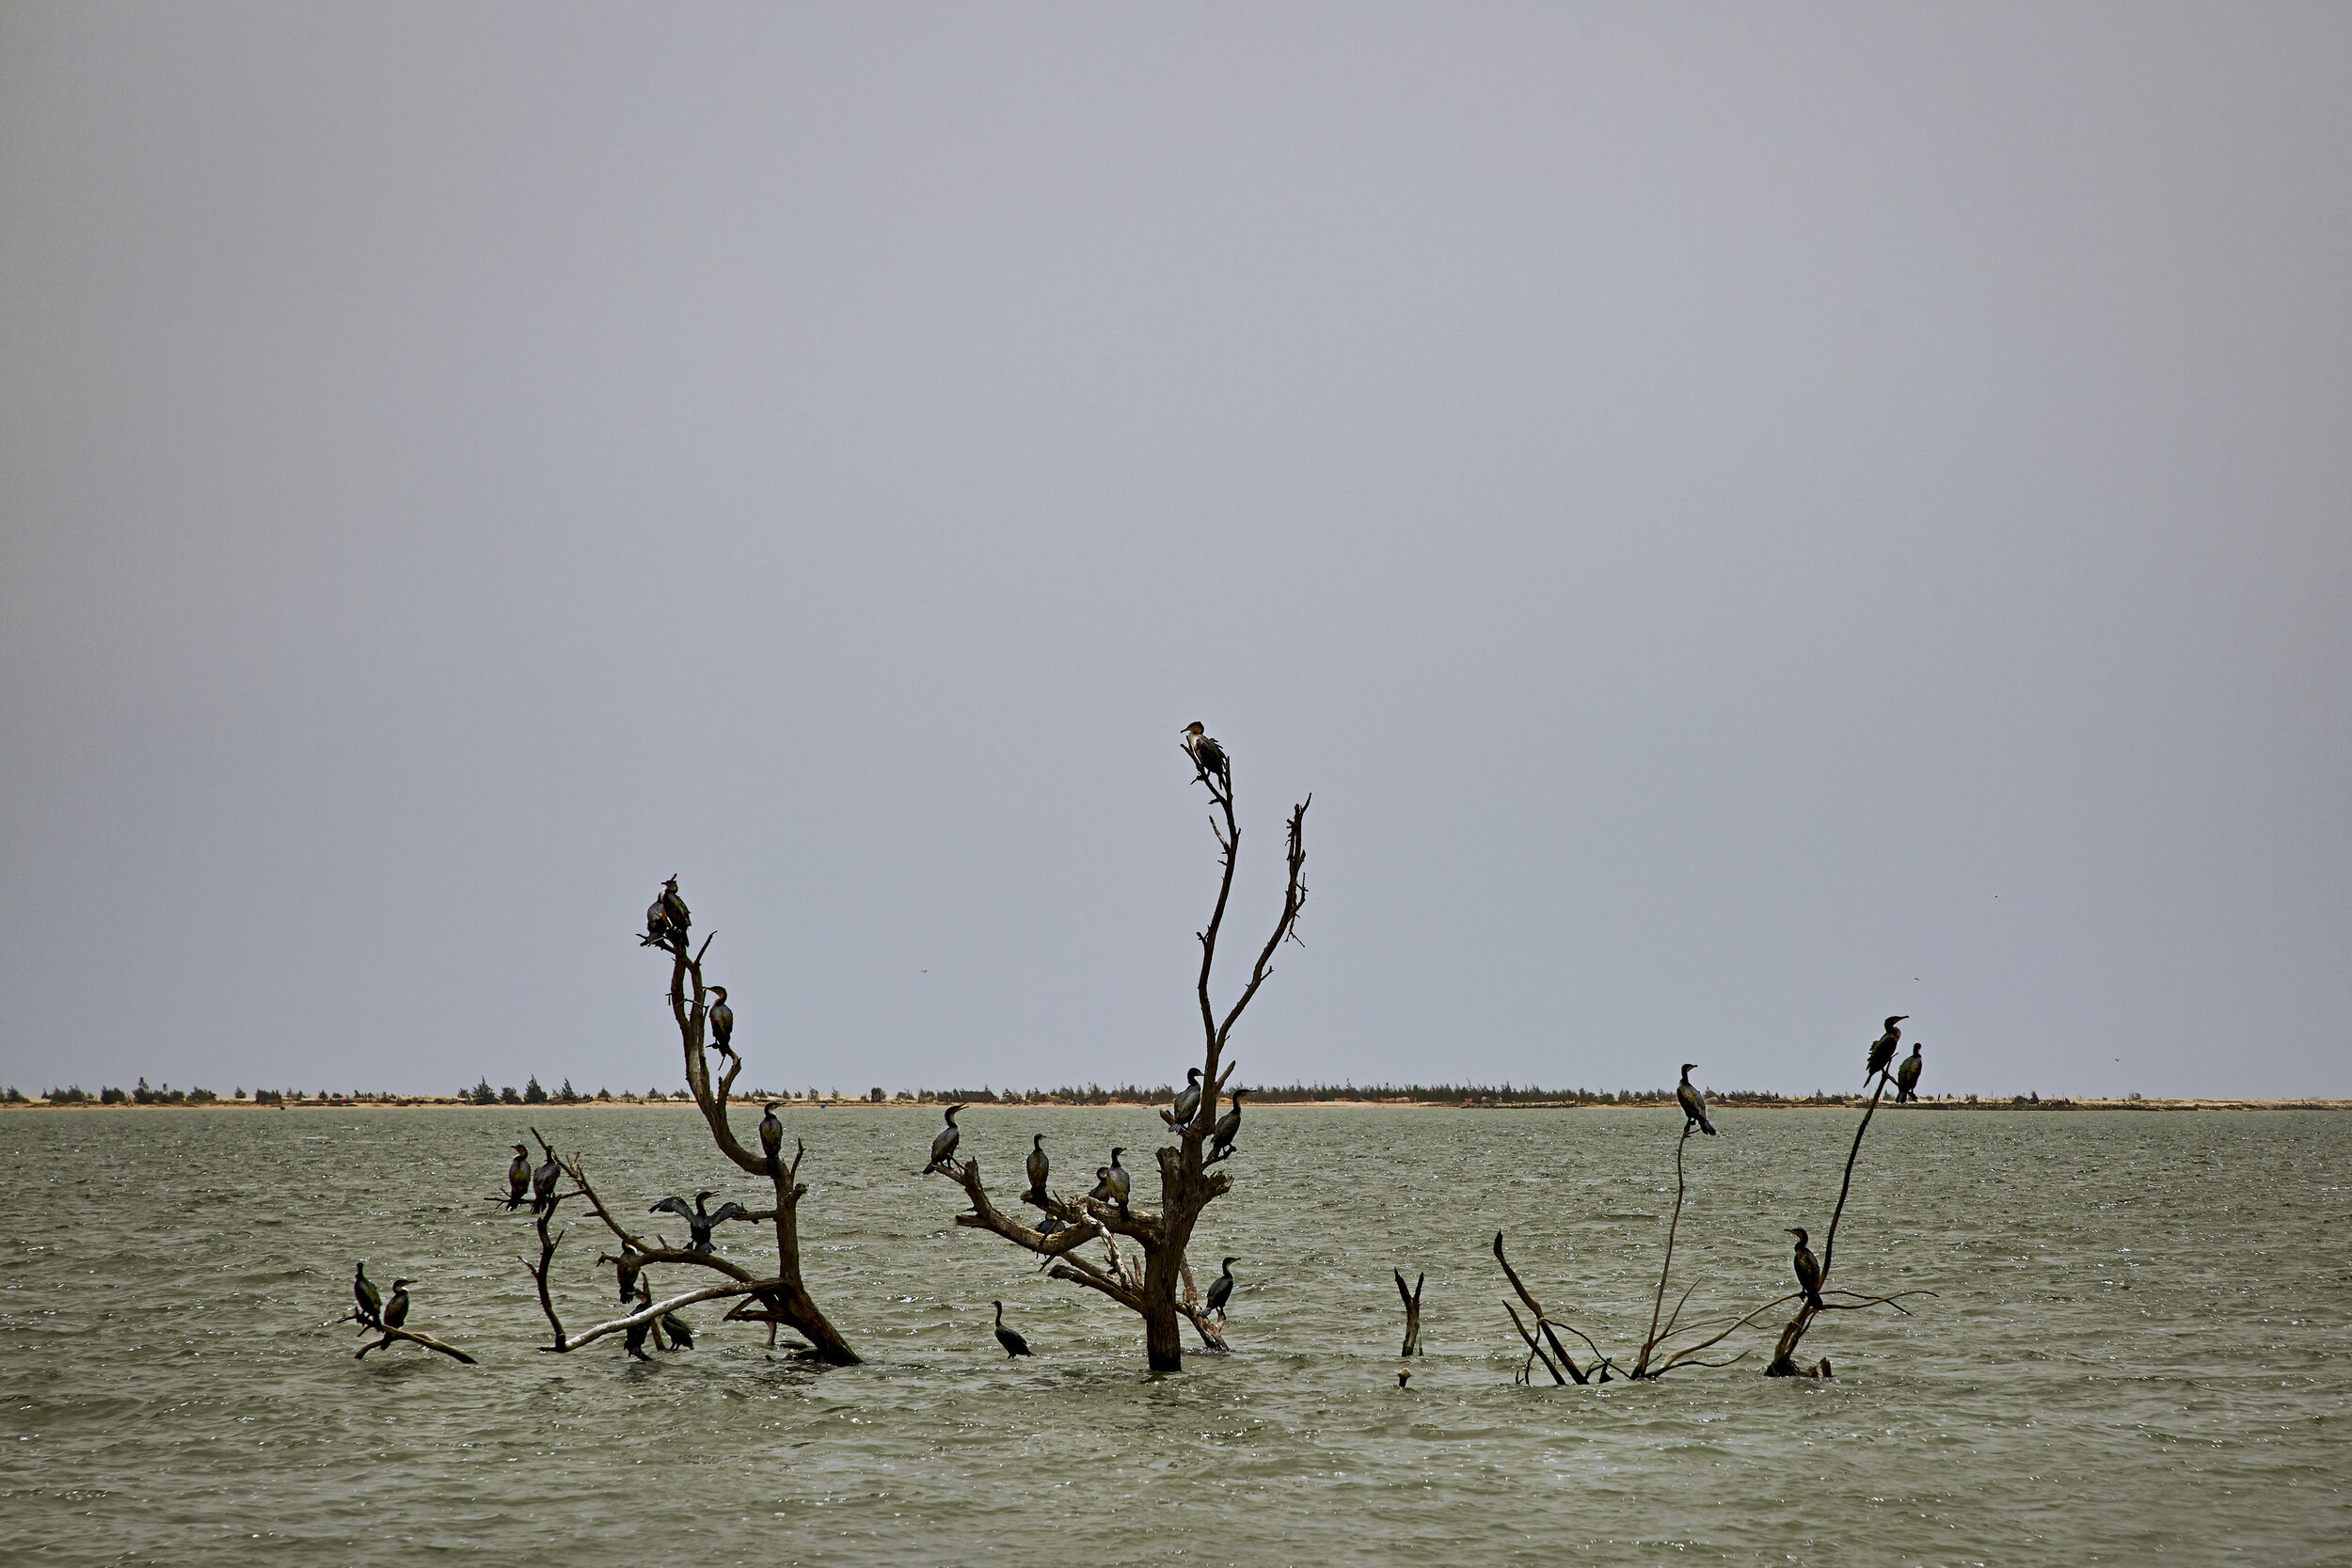  The tree that previously marked the center of the village of Doun Baba Dieye is now covered by water, taken over by cormorant birds.   Doun Baba Dieye was a village of fishermen, farmers and cattle people, south of Saint-Louis. Here- due to the chan